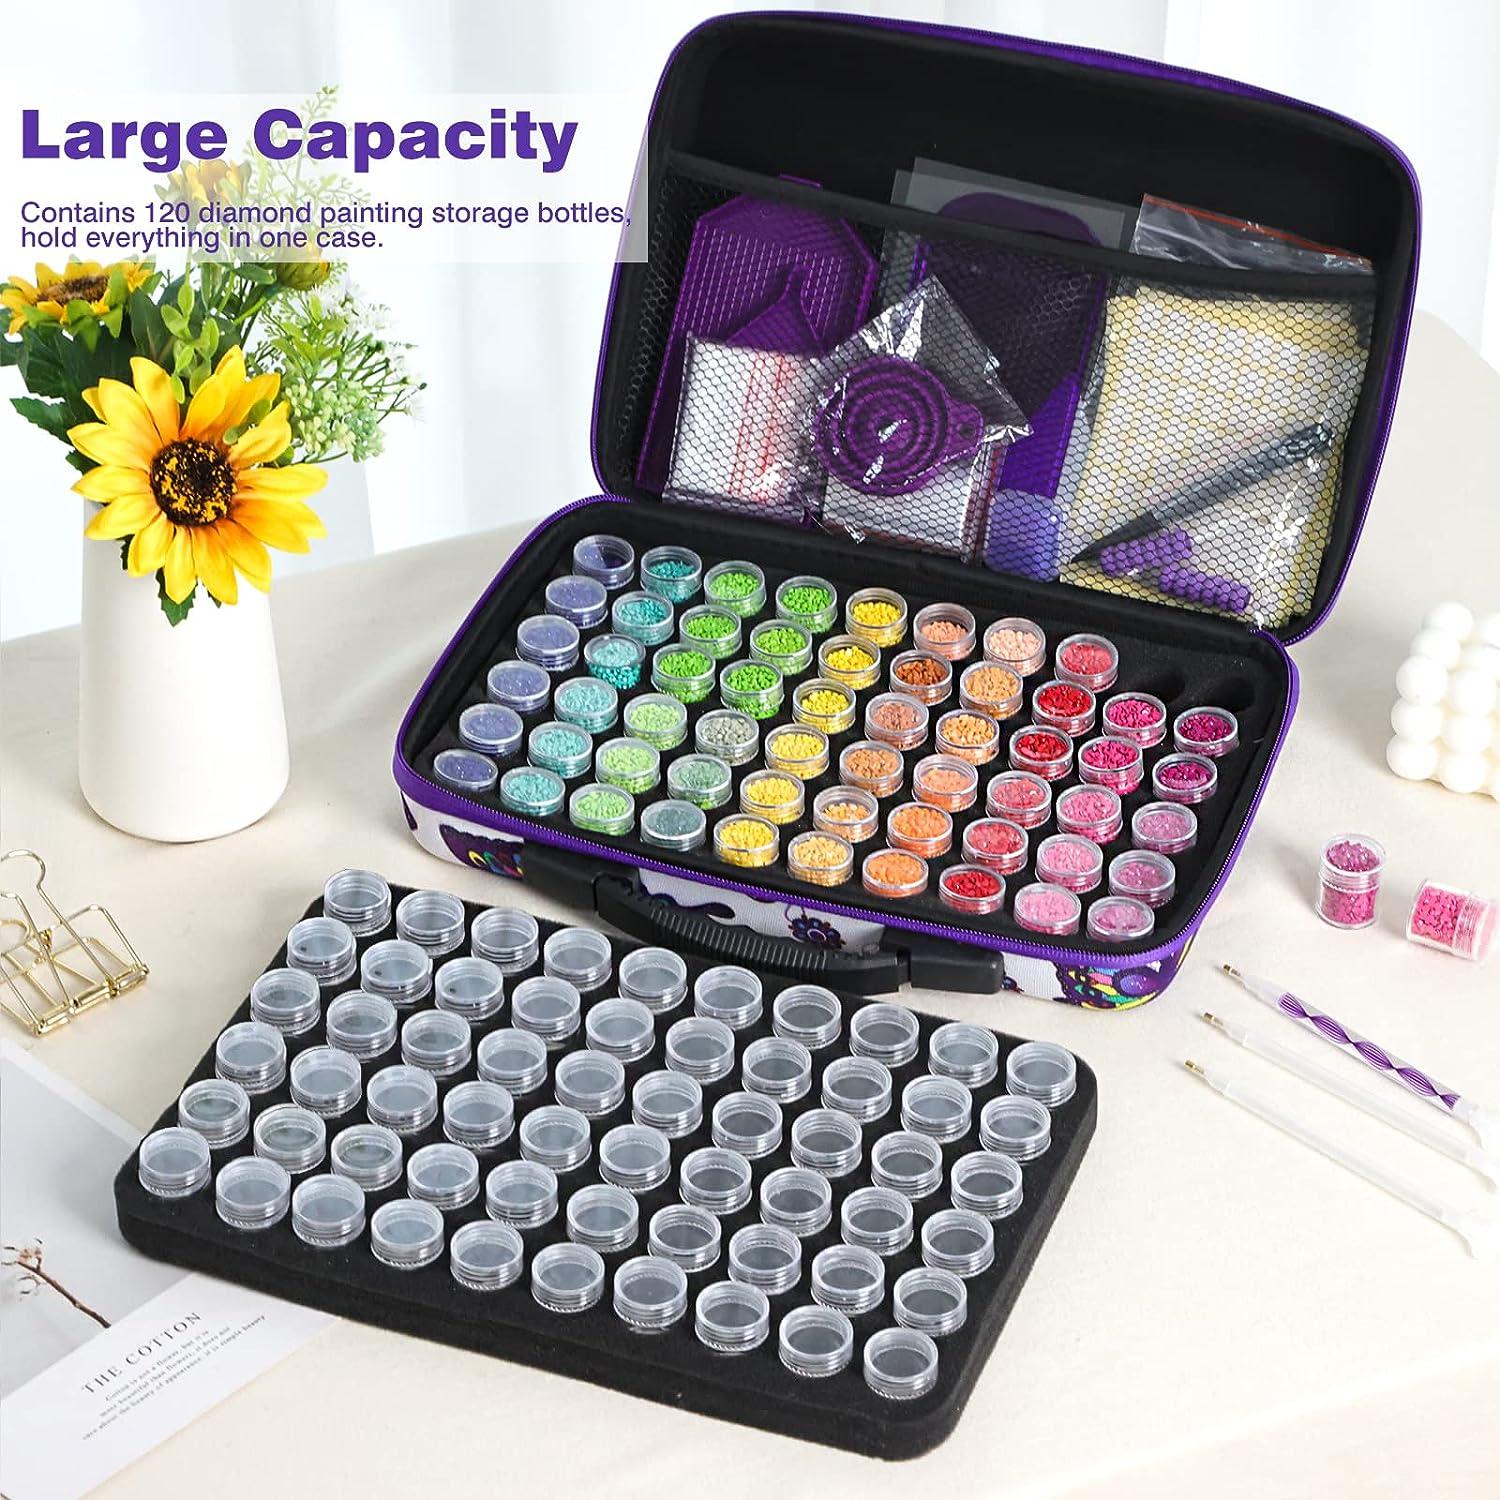 Large Bead Organizer Box - 24 Slots Diamond Picture Storage Containers, 5D  Diamond Embroidery Accessories Bead Organizer Case with Label Stickers for